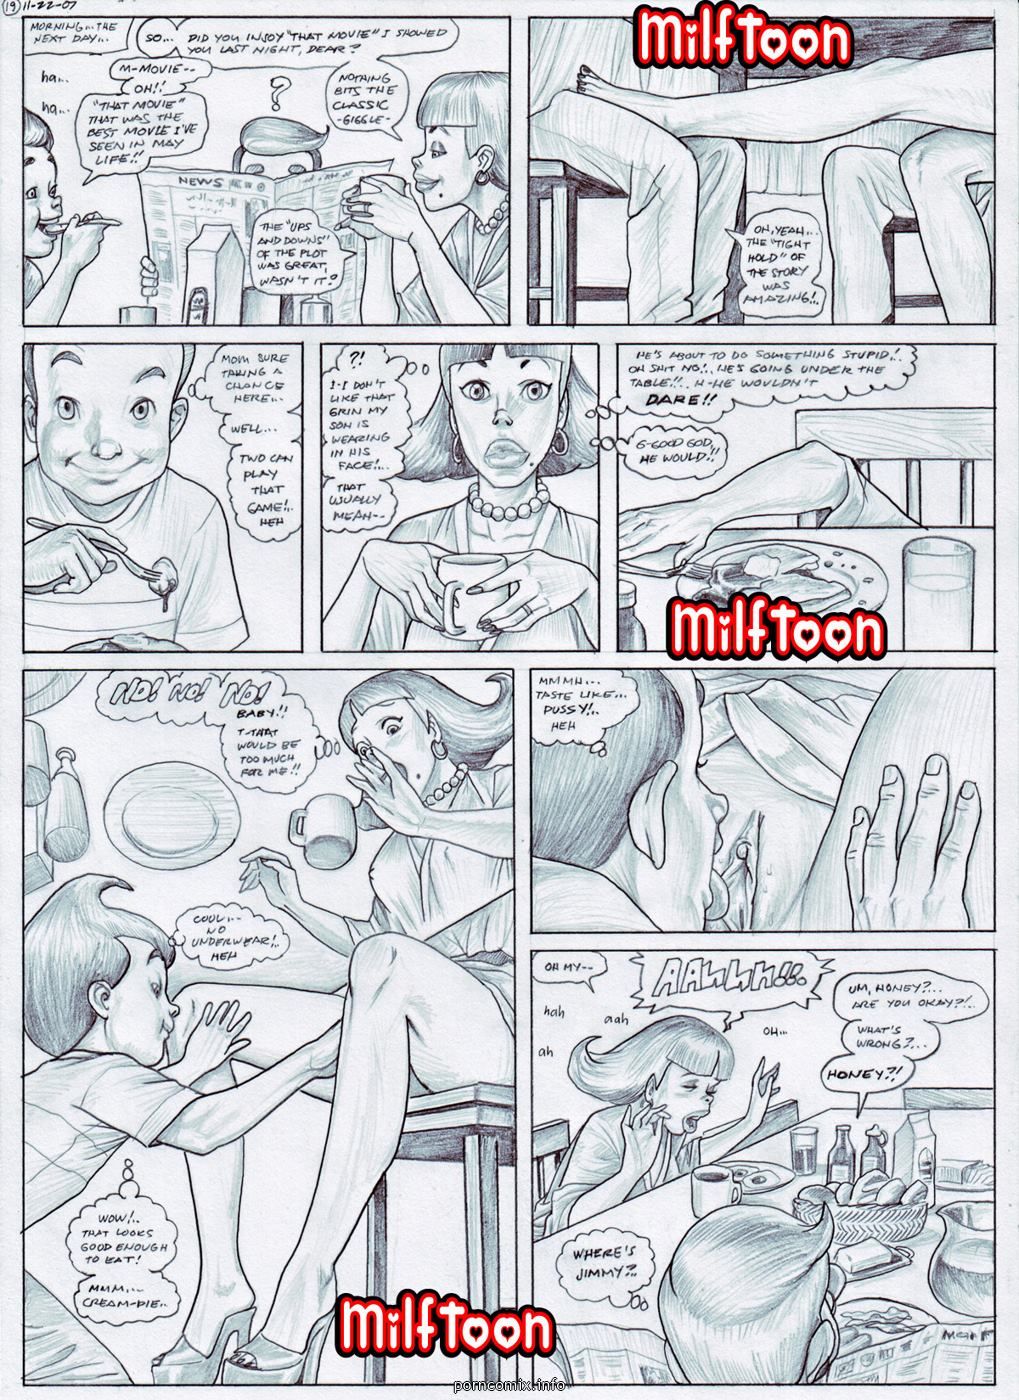 Milftoon - Jimmy Naitron page 20